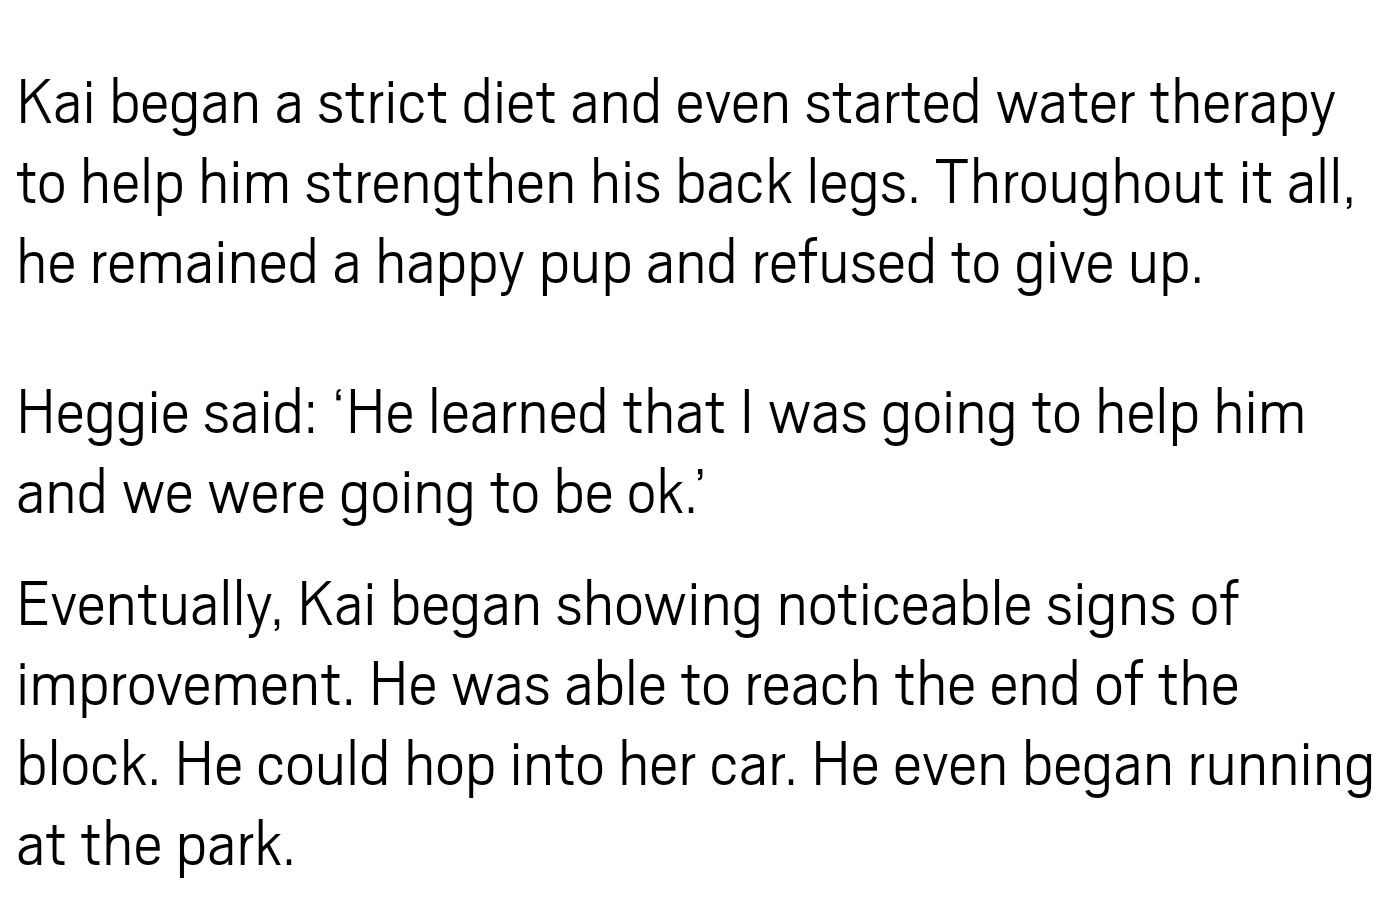 Kai began a strict diet and even started water therapy to help him strengthen his back legs. Throughout it all, he remained a happy pup and refused to give up. Heggie said 'He learned that I was going to help him and we were going to be